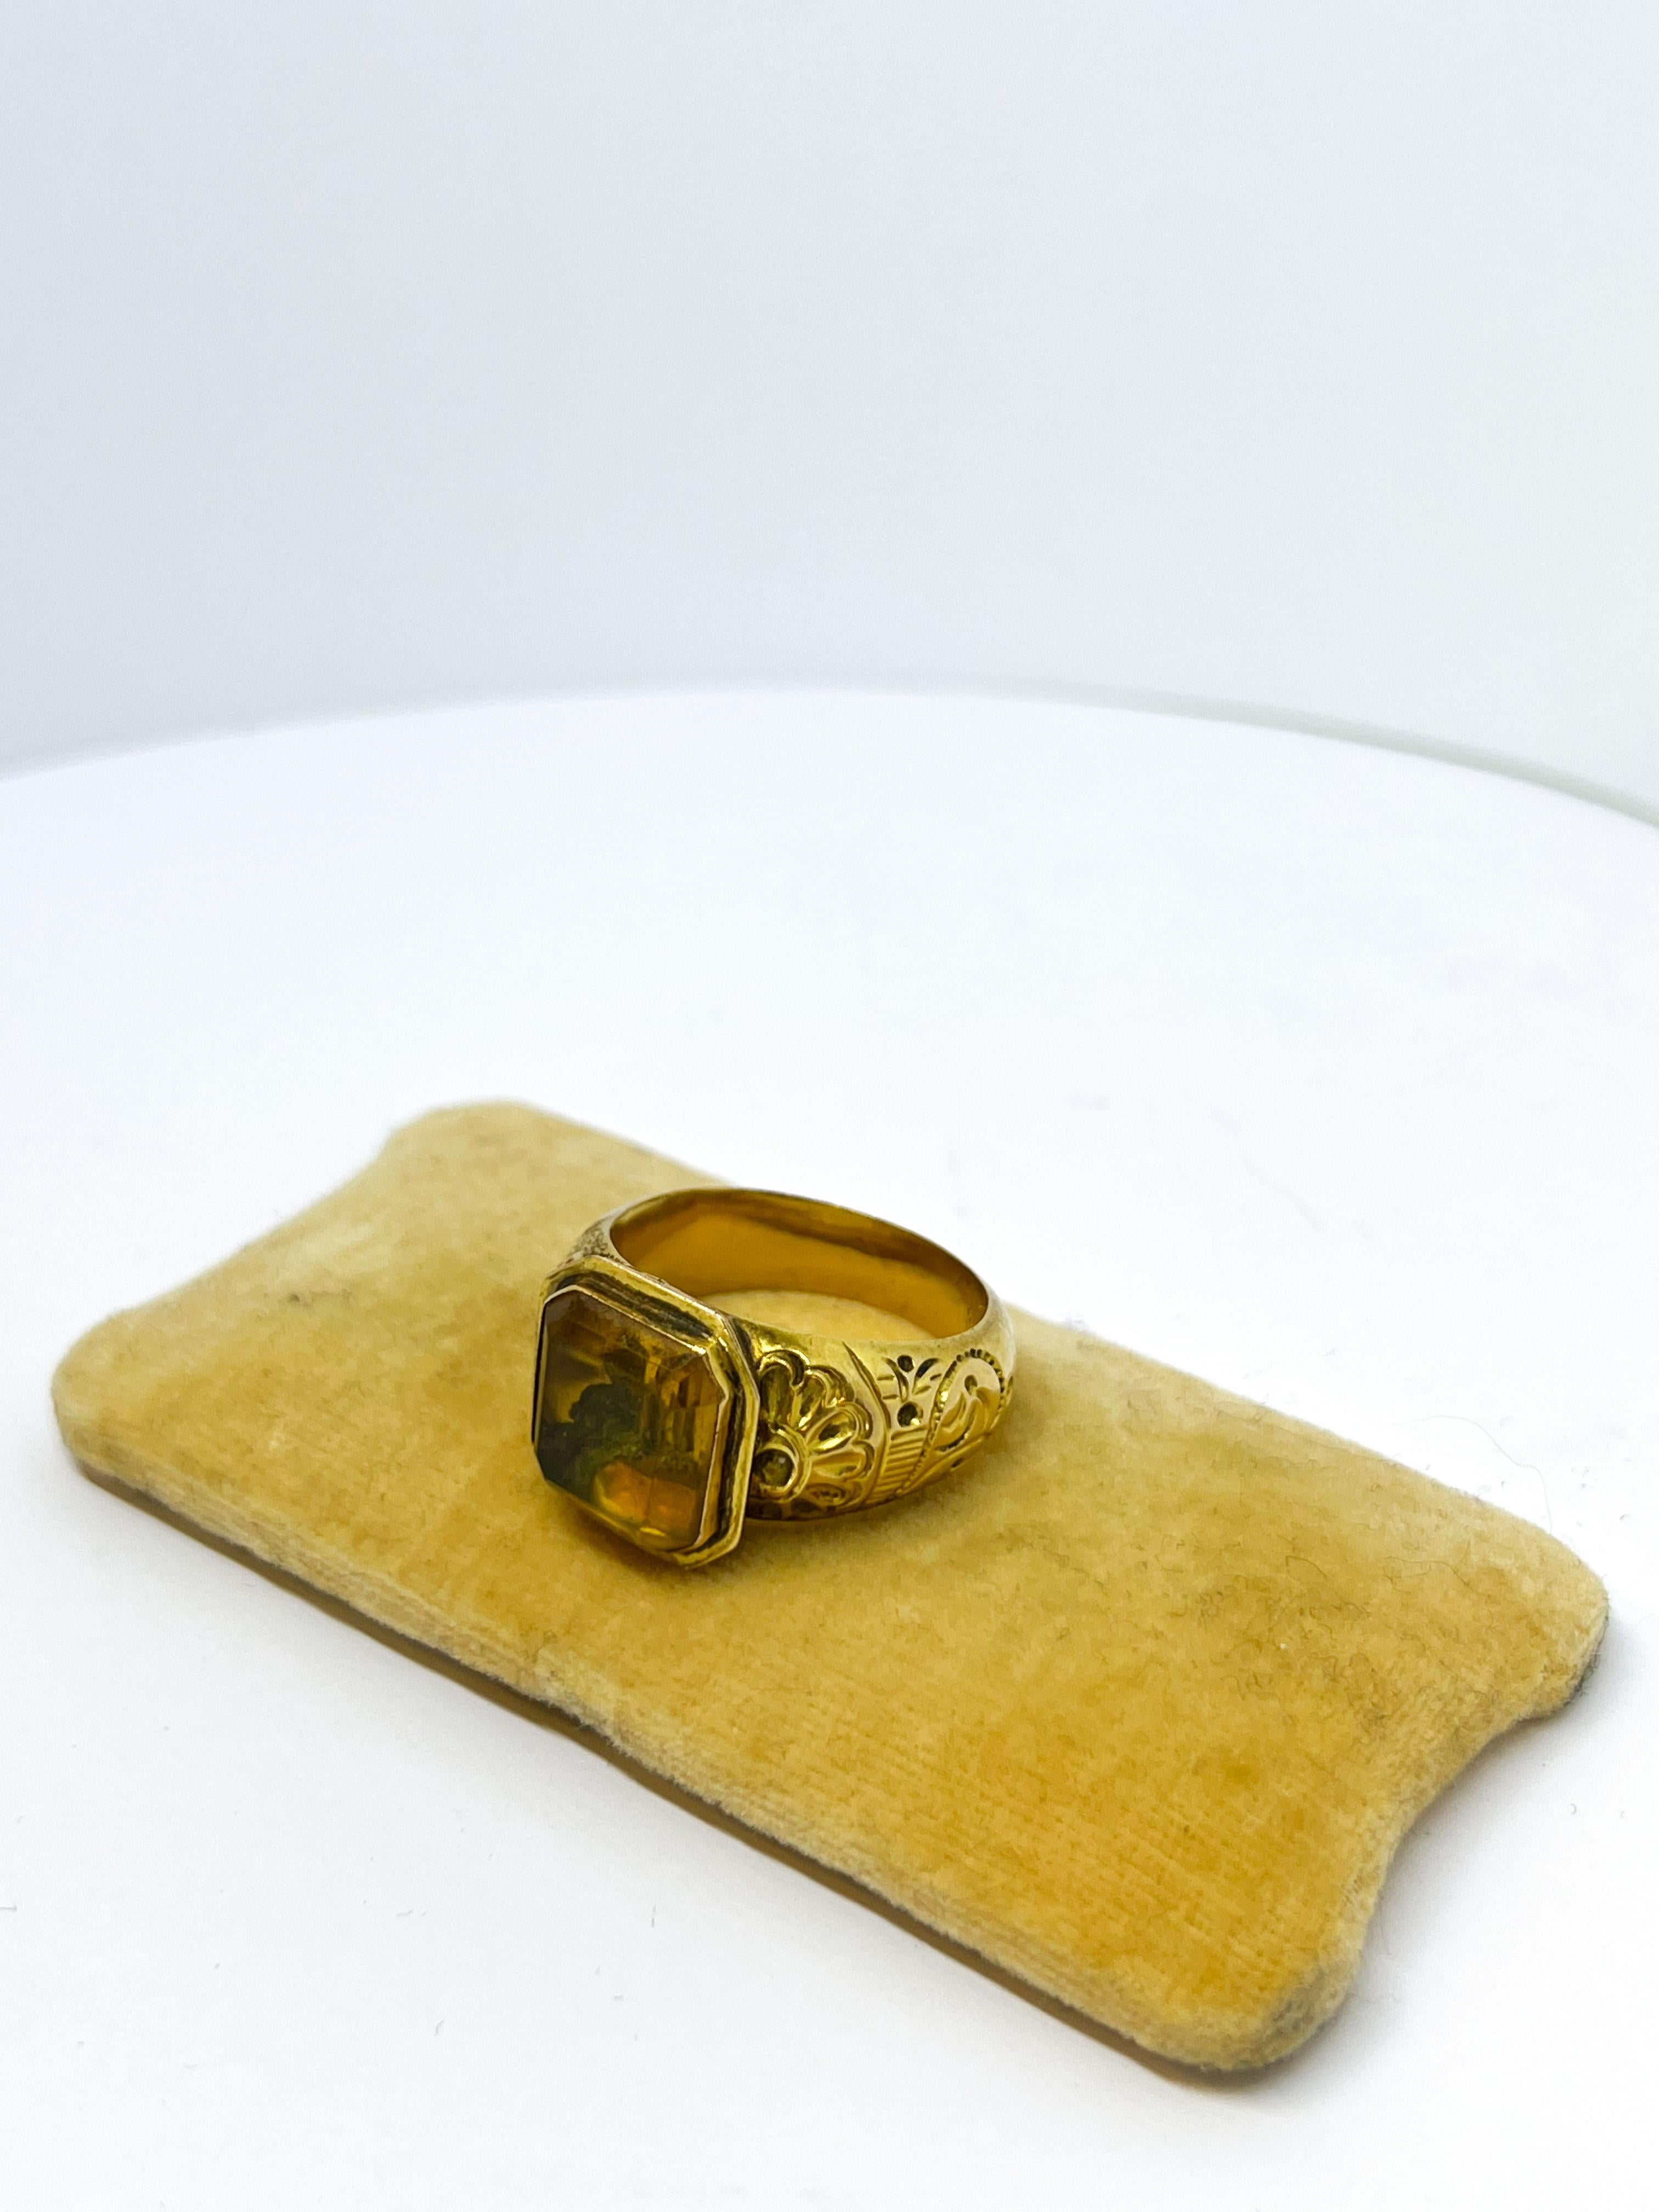 Women's or Men's Antique Gold Ring 1855-1877 Tampere Finland For Sale